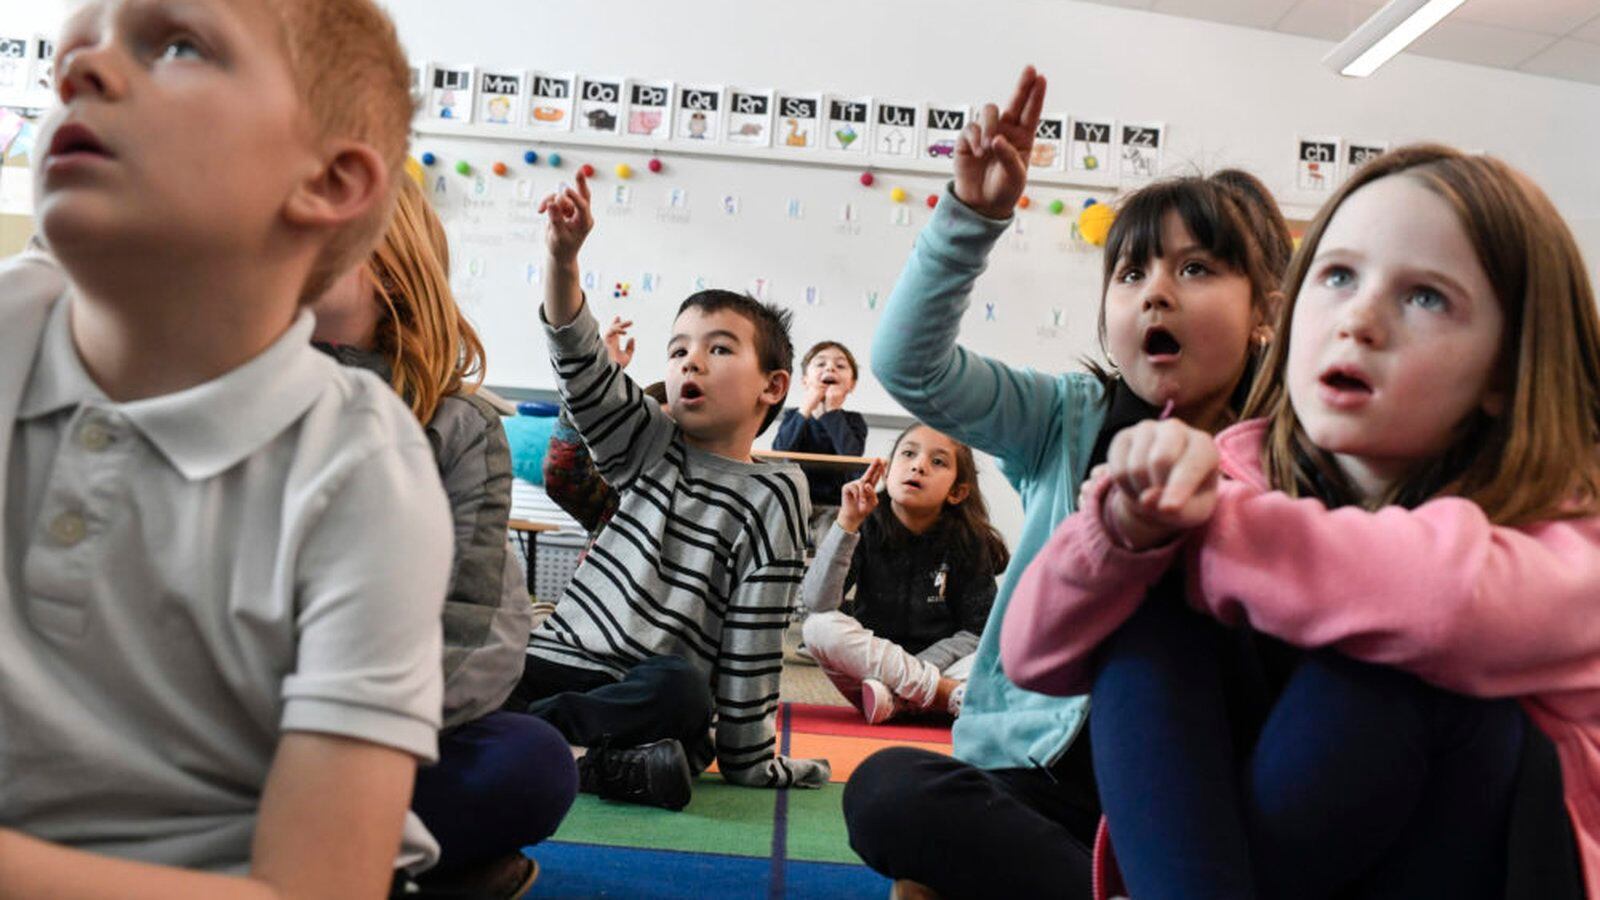 First-graders sit on a rug in a classroom. Their hands are in the air, tracing letters. Their mouths are open as they repeat after the teacher.